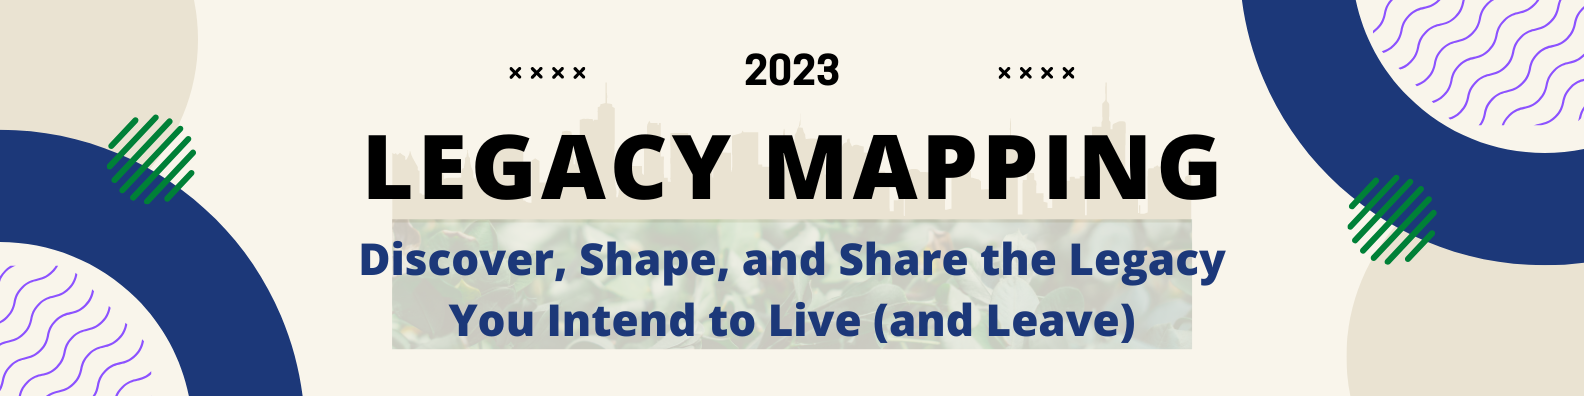 Legacy Mapping